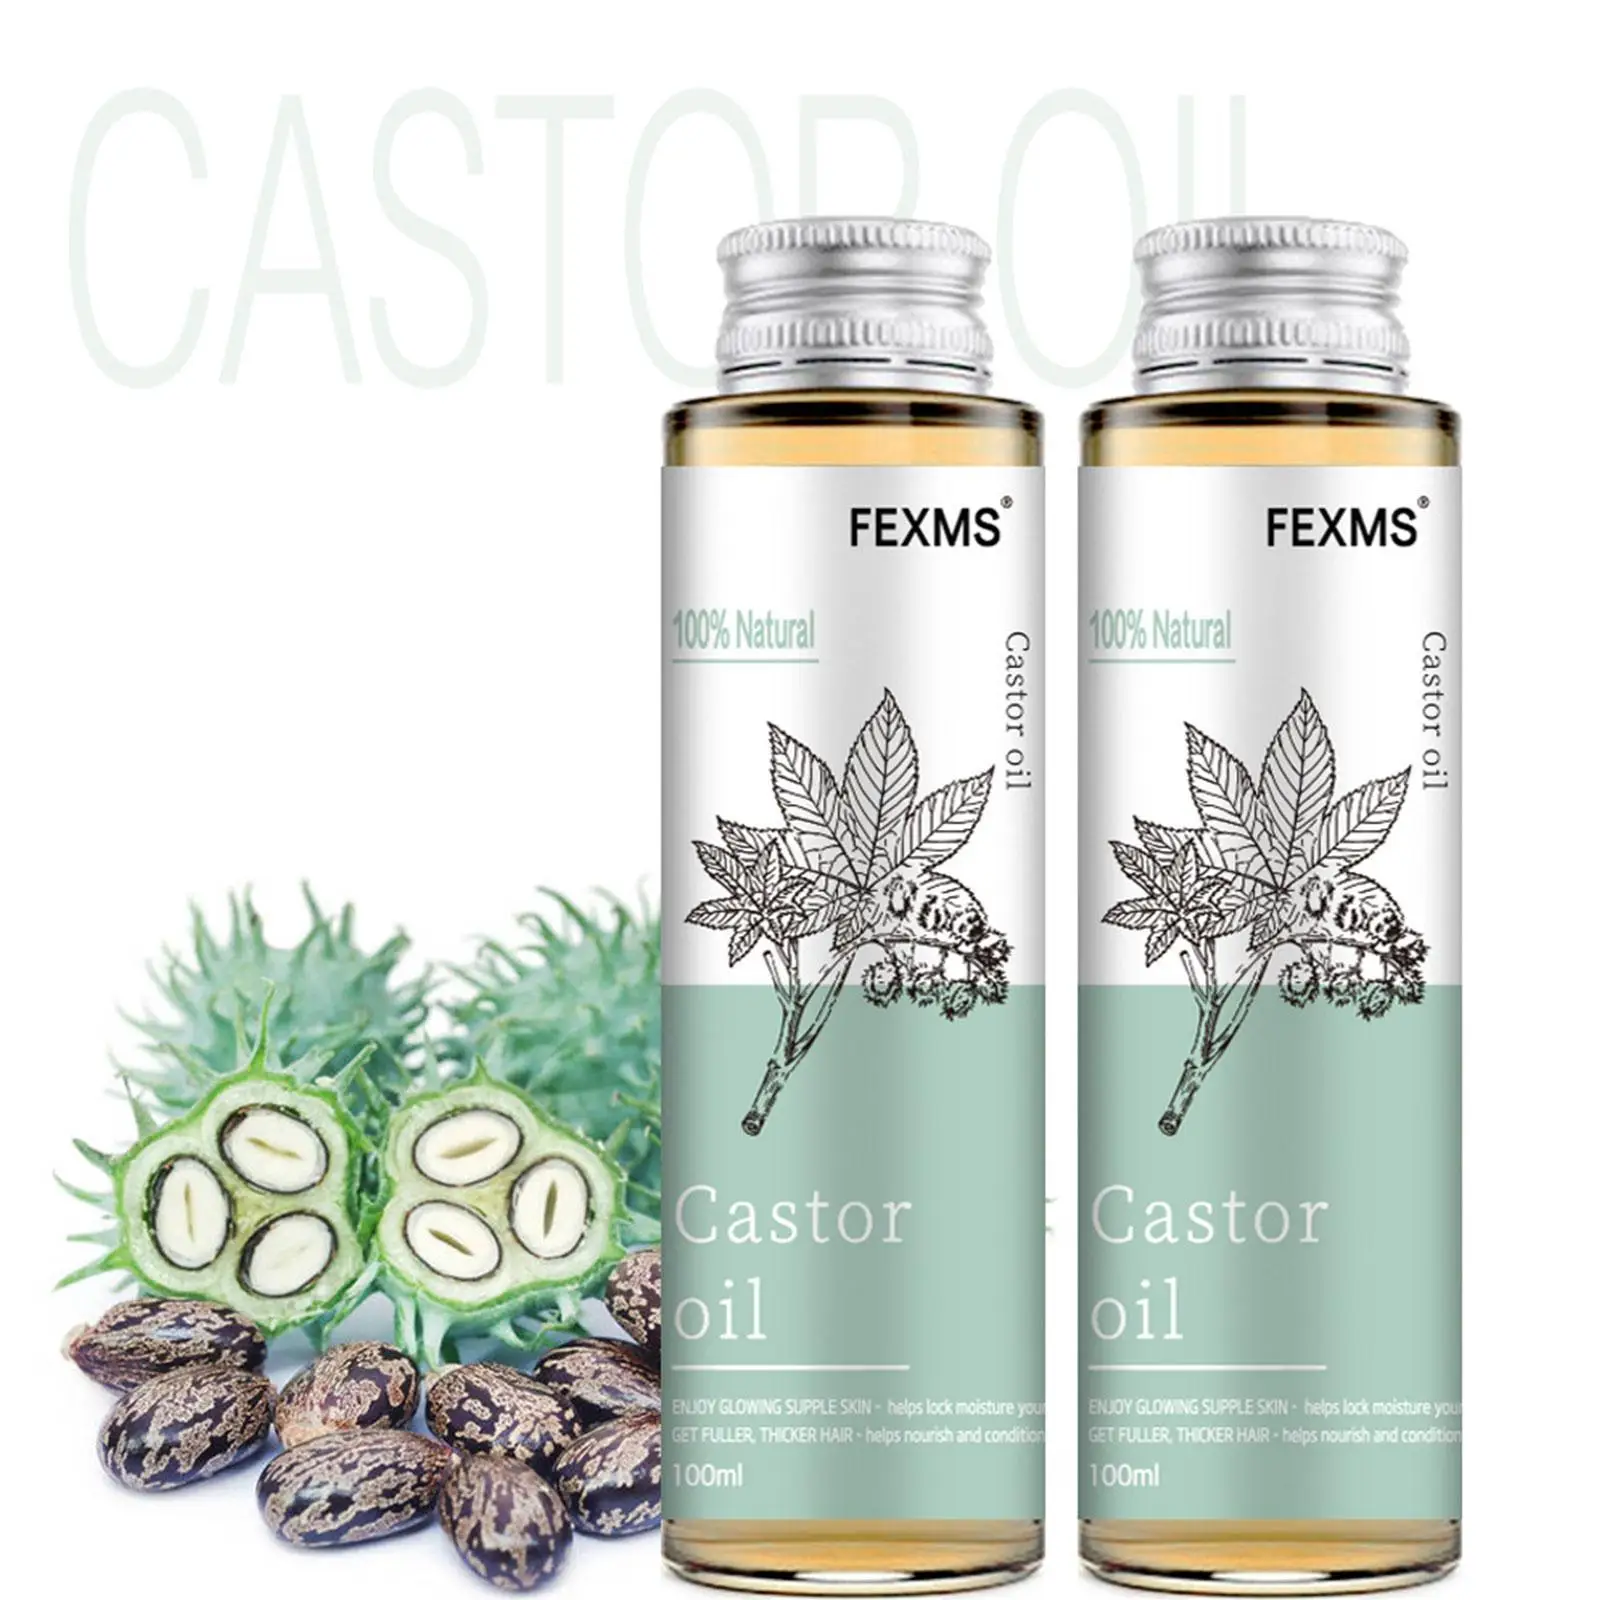 

100ML Pure And Castor Oil For Hair Growth, Eyelashes And Eyebrows - Carrier Oil For Essential Oils, Aromatherapy And Massage